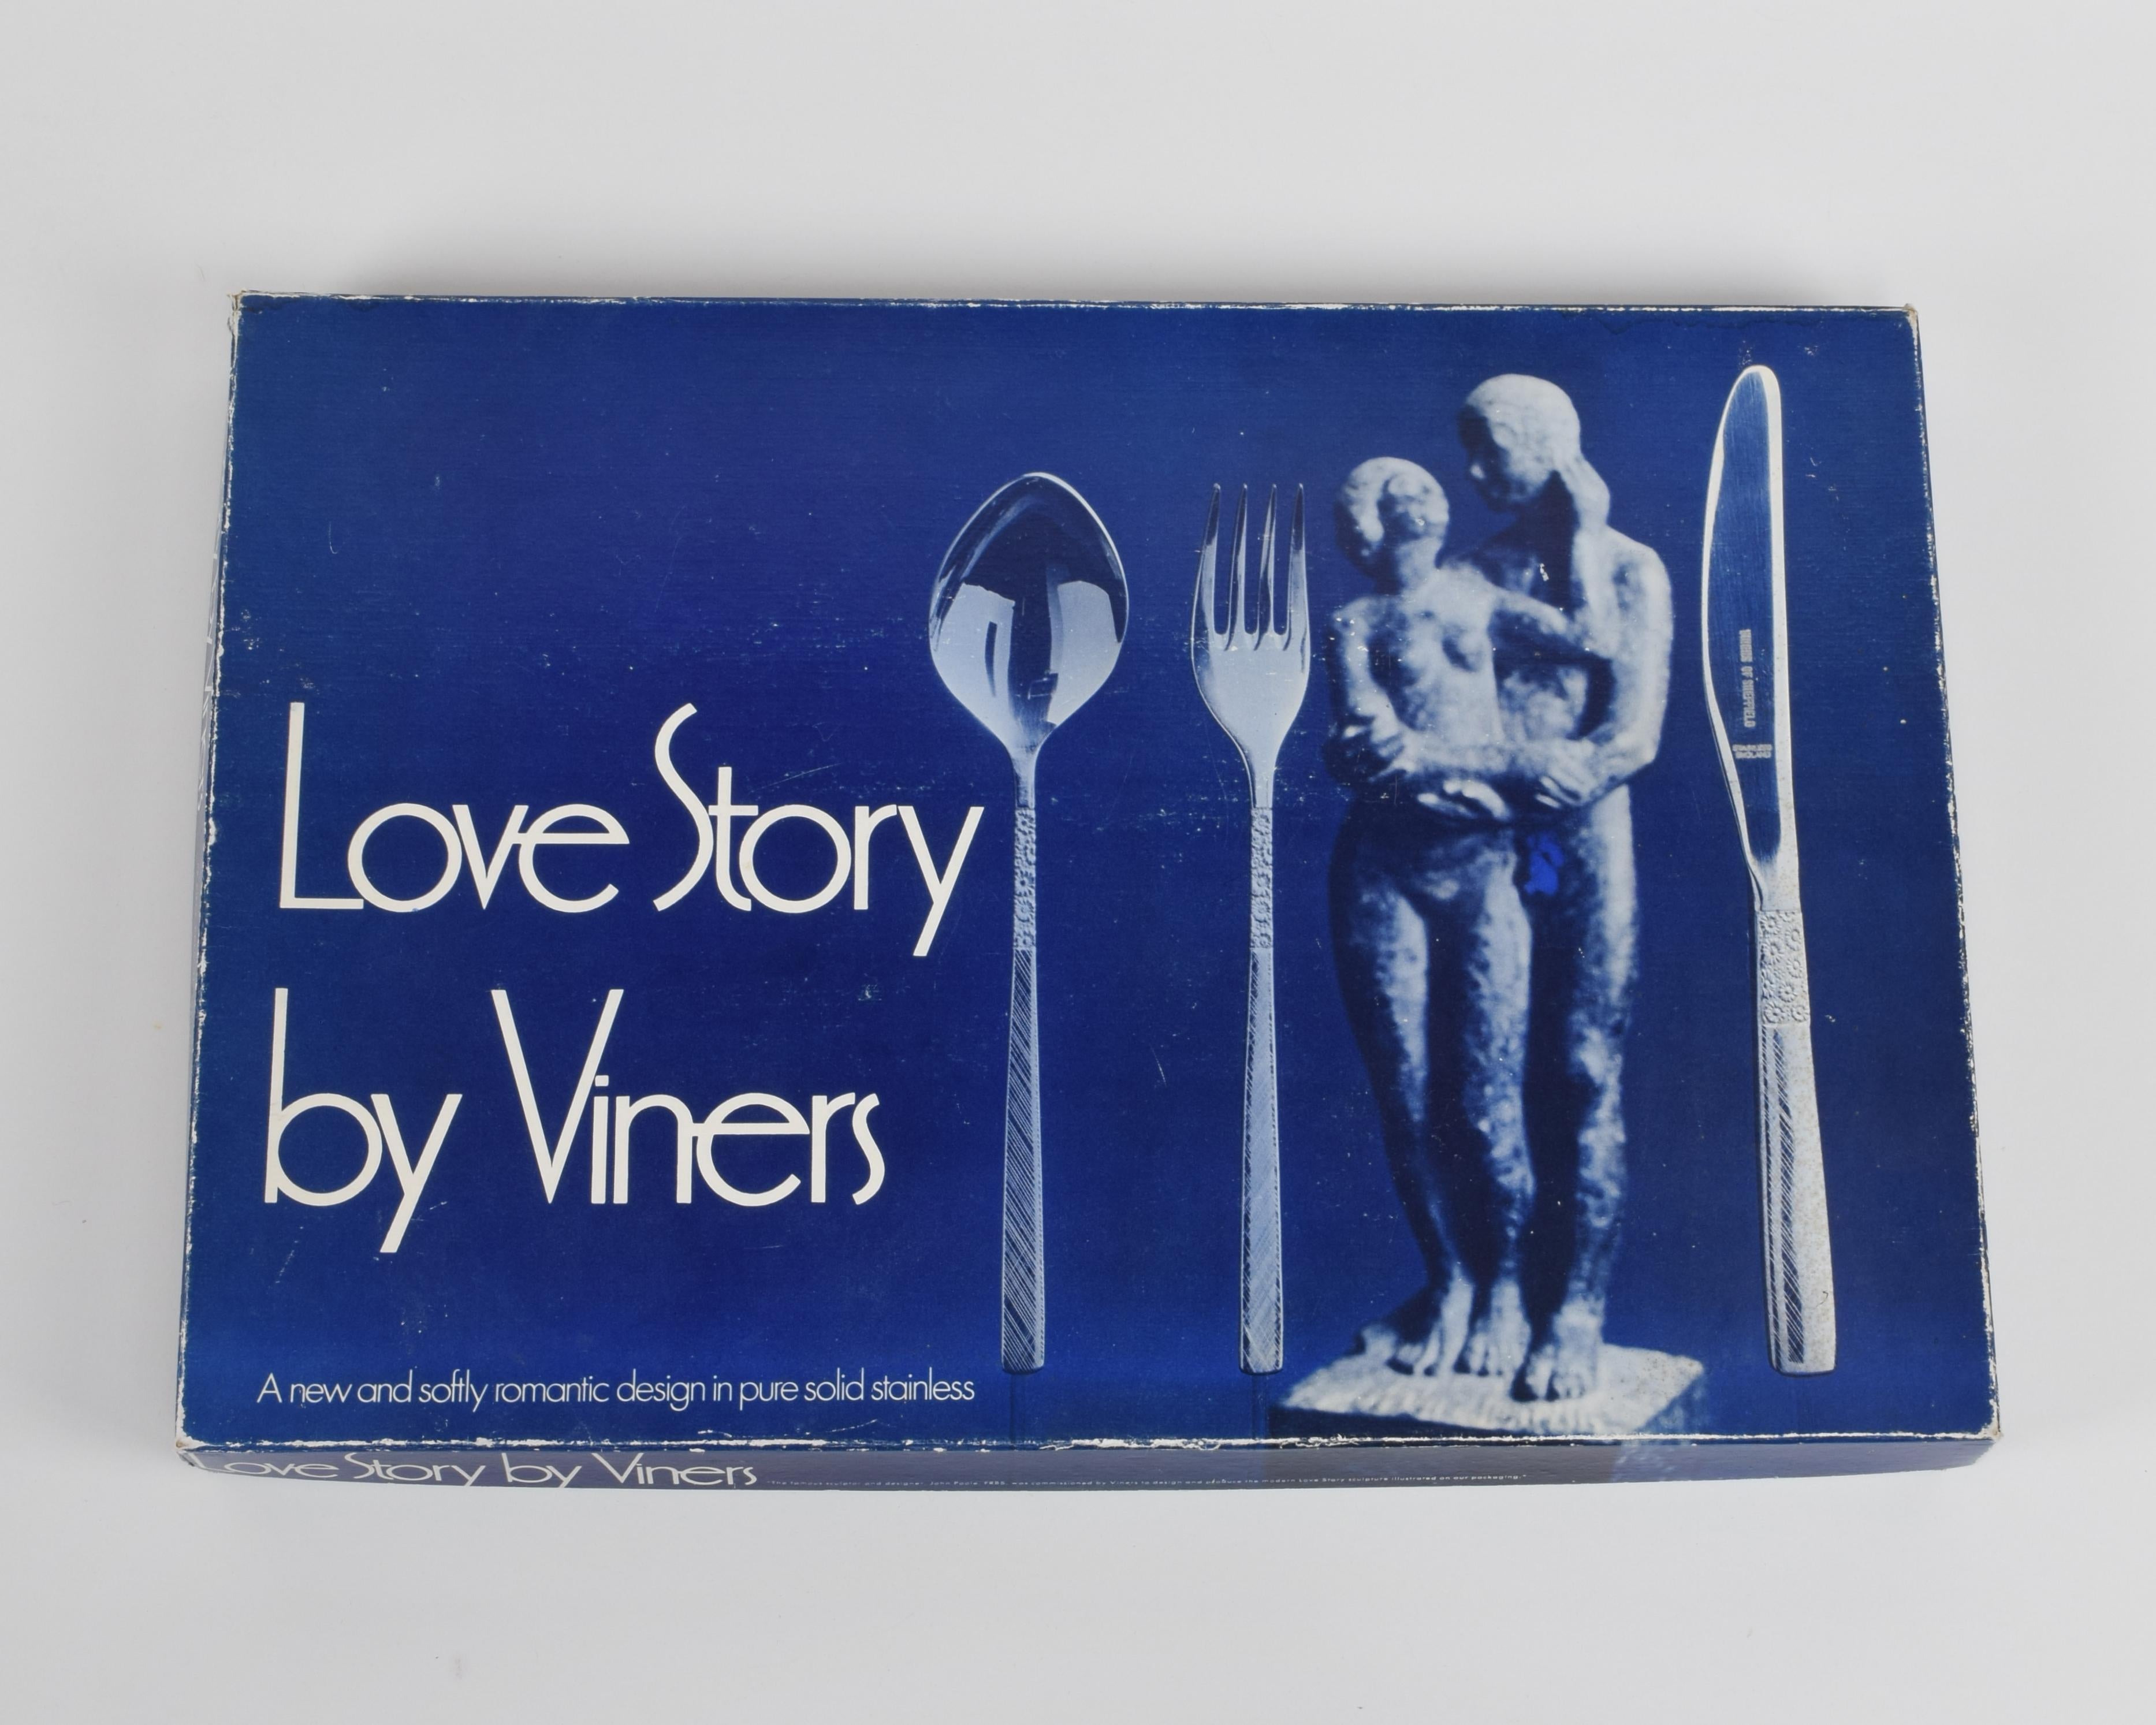 British Viners ‘Love Story’ cutlery, Presentation set, stainless steel, 44 pc, 1970s